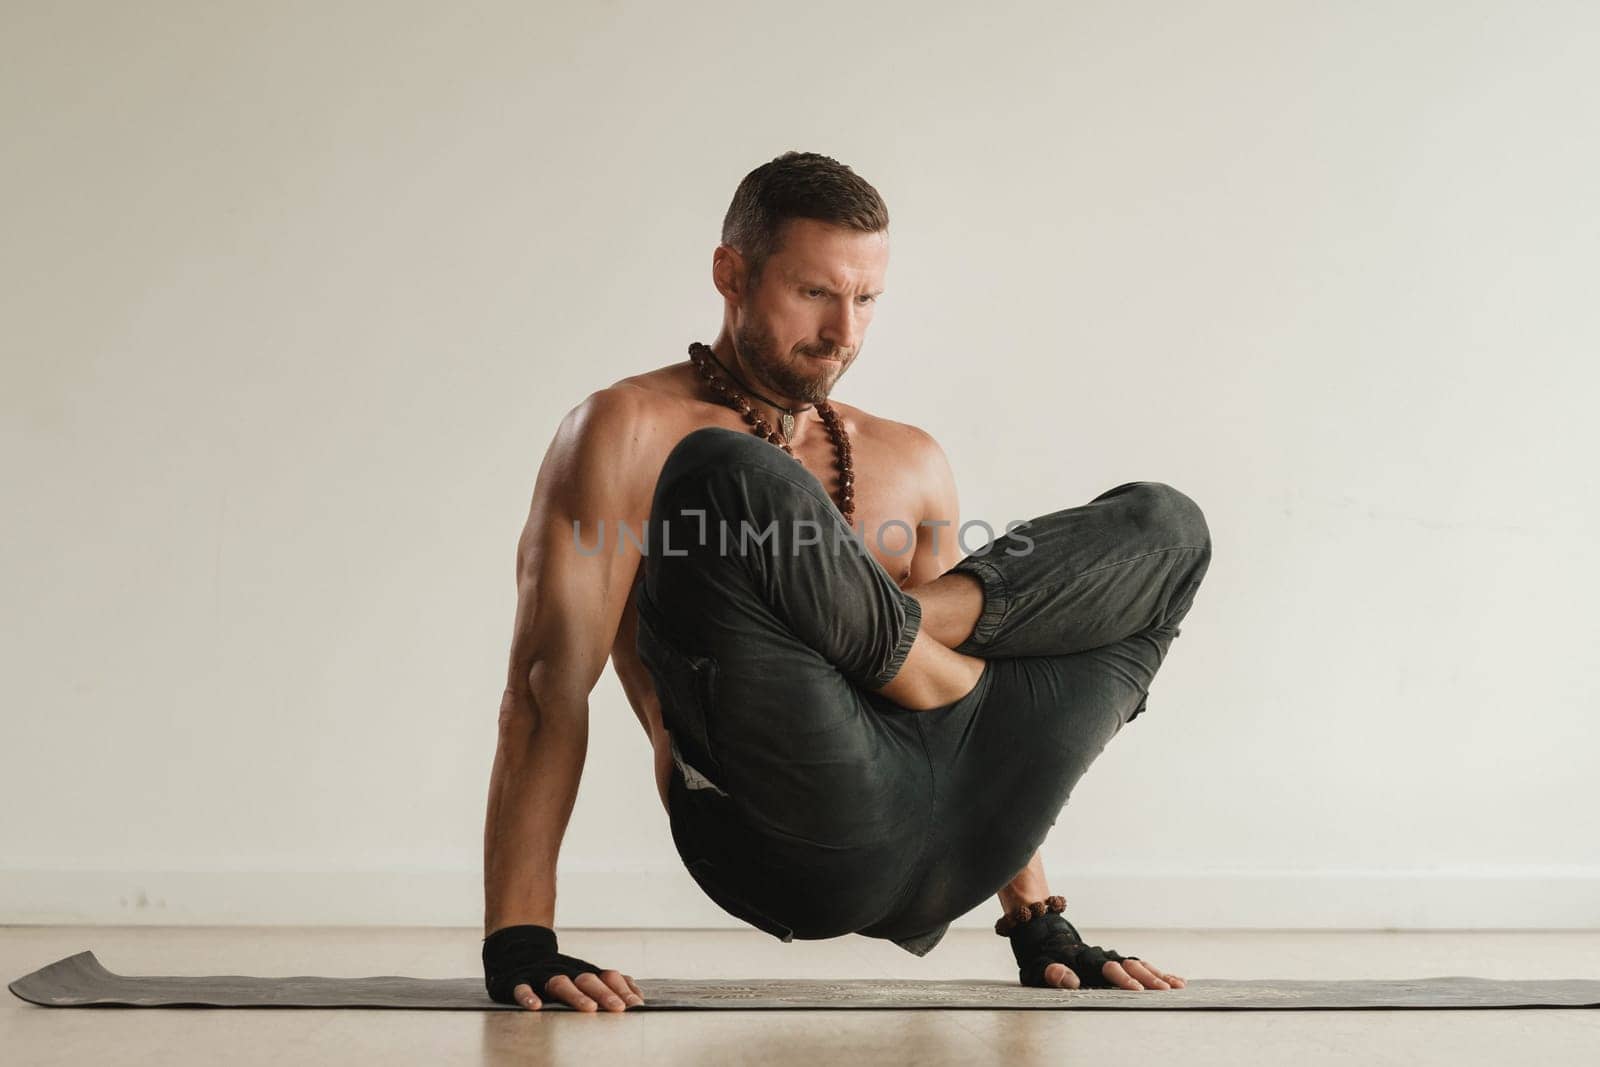 a man with a naked torso does yoga standing on his hands indoors. Fitness Trainer.